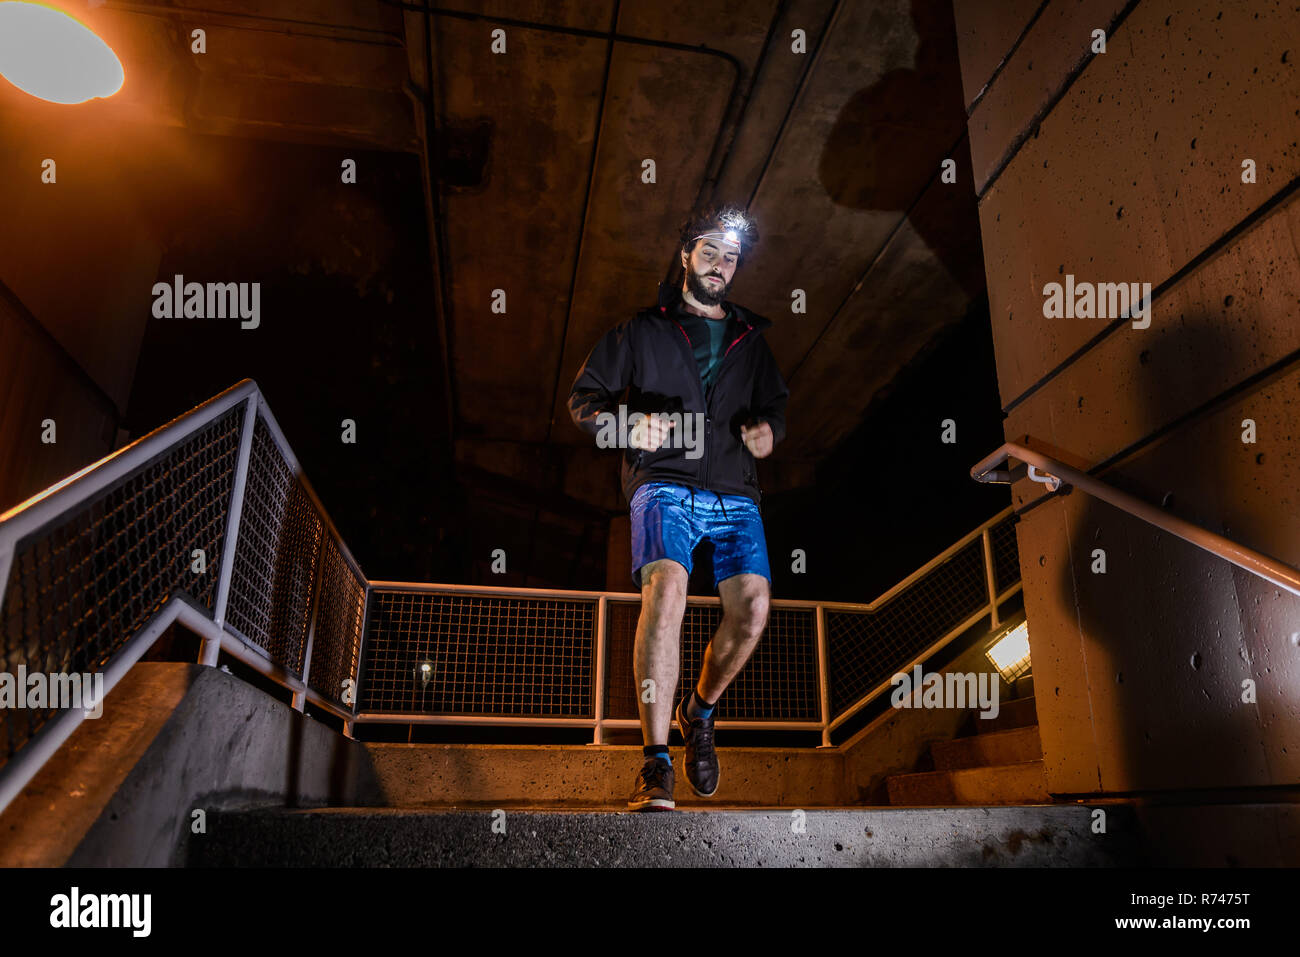 Runner with headlamp going down stairs, North Vancouver, Canada Stock Photo